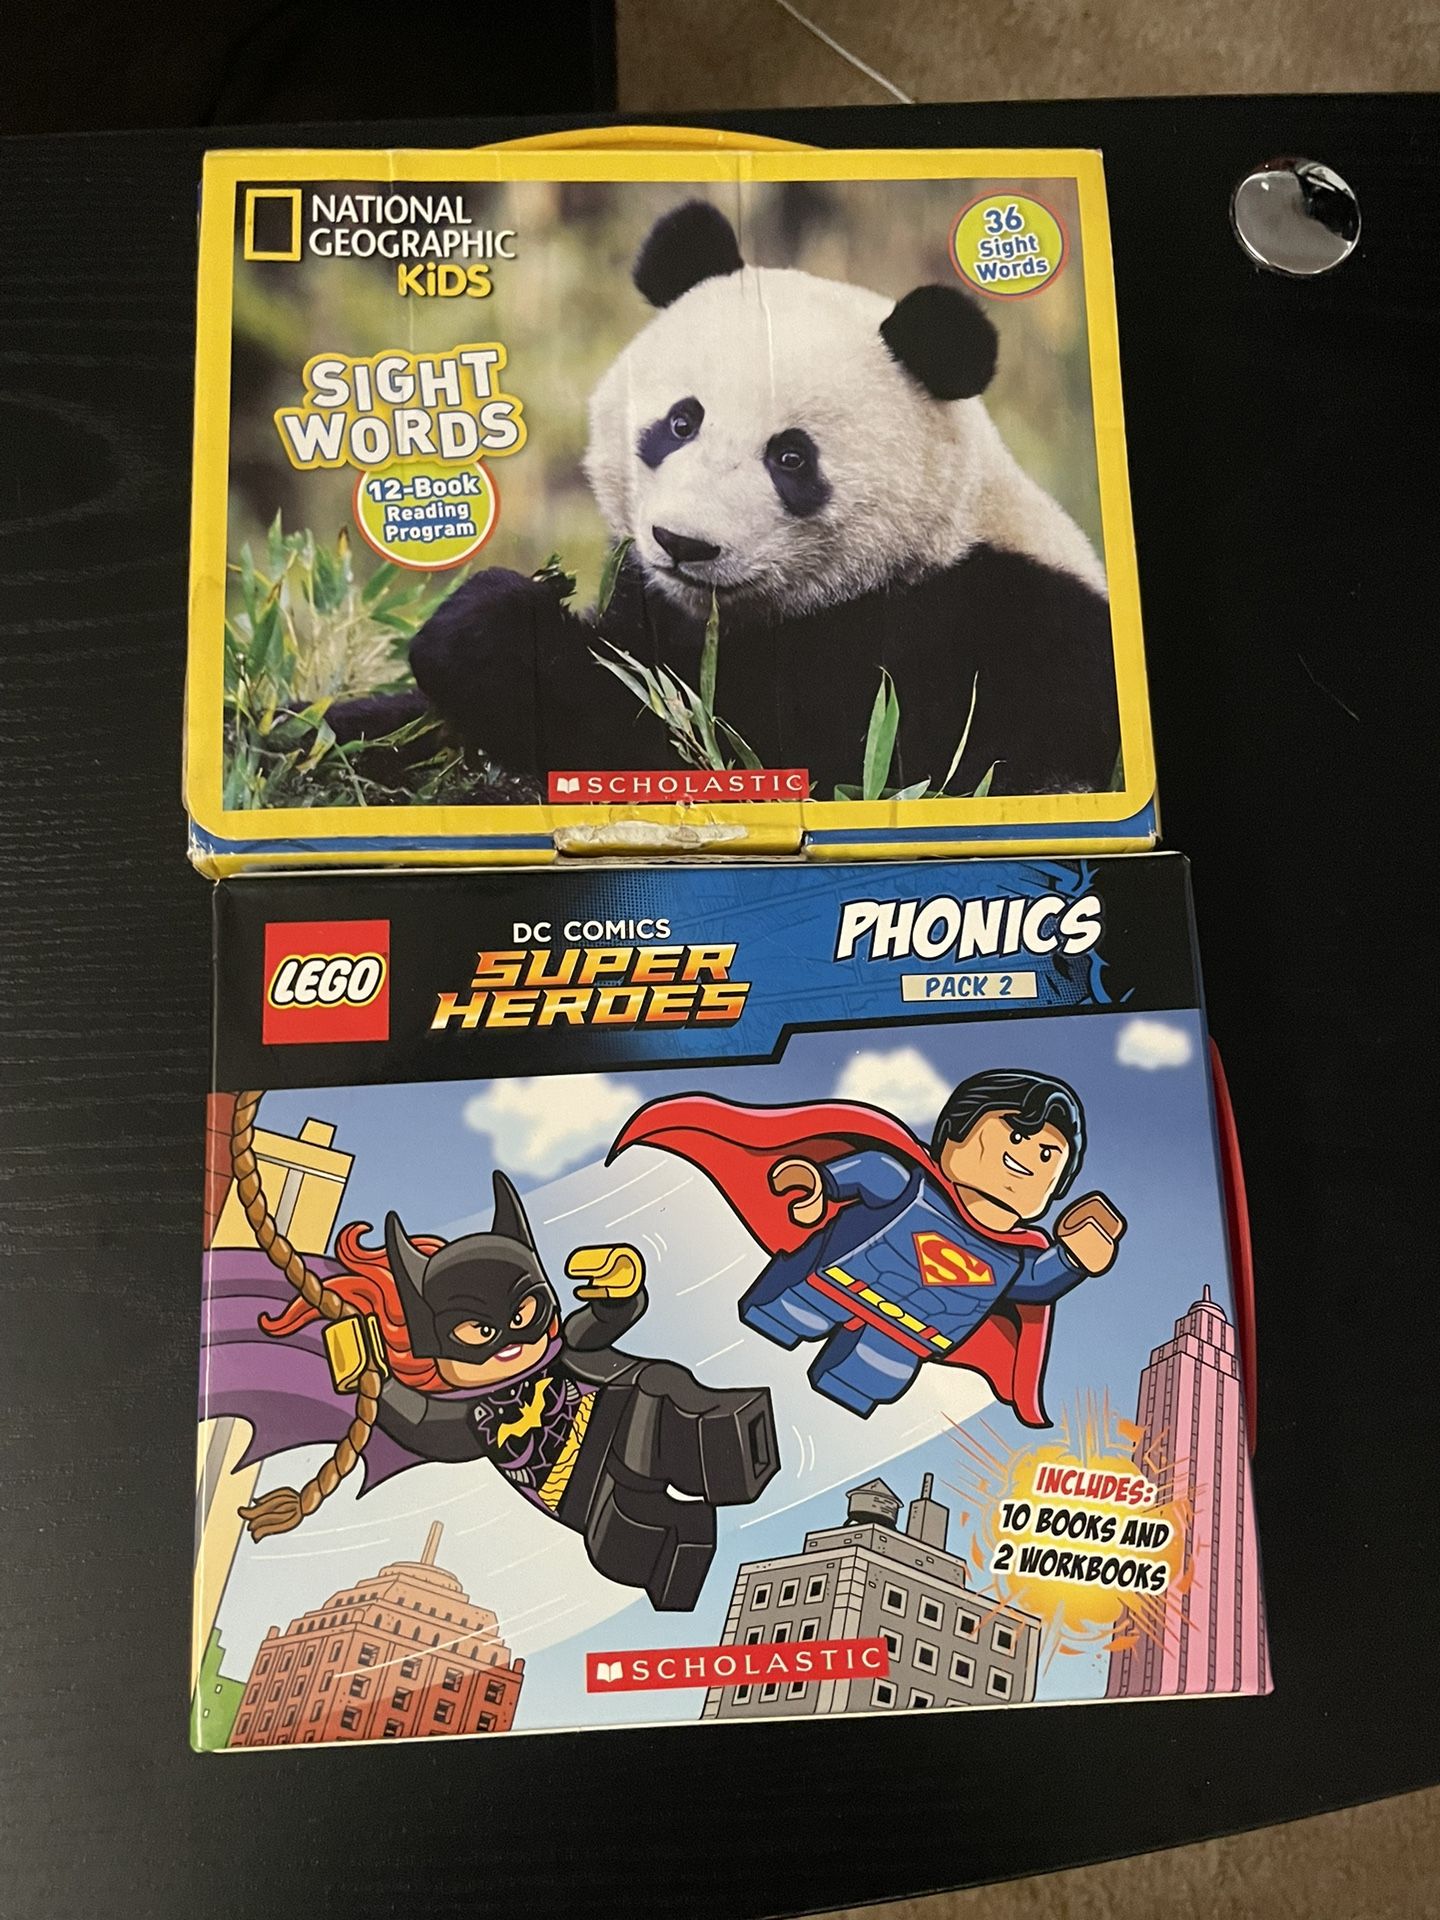 National Geographic Sight Word Readers and DC Heroes Phonics Readers